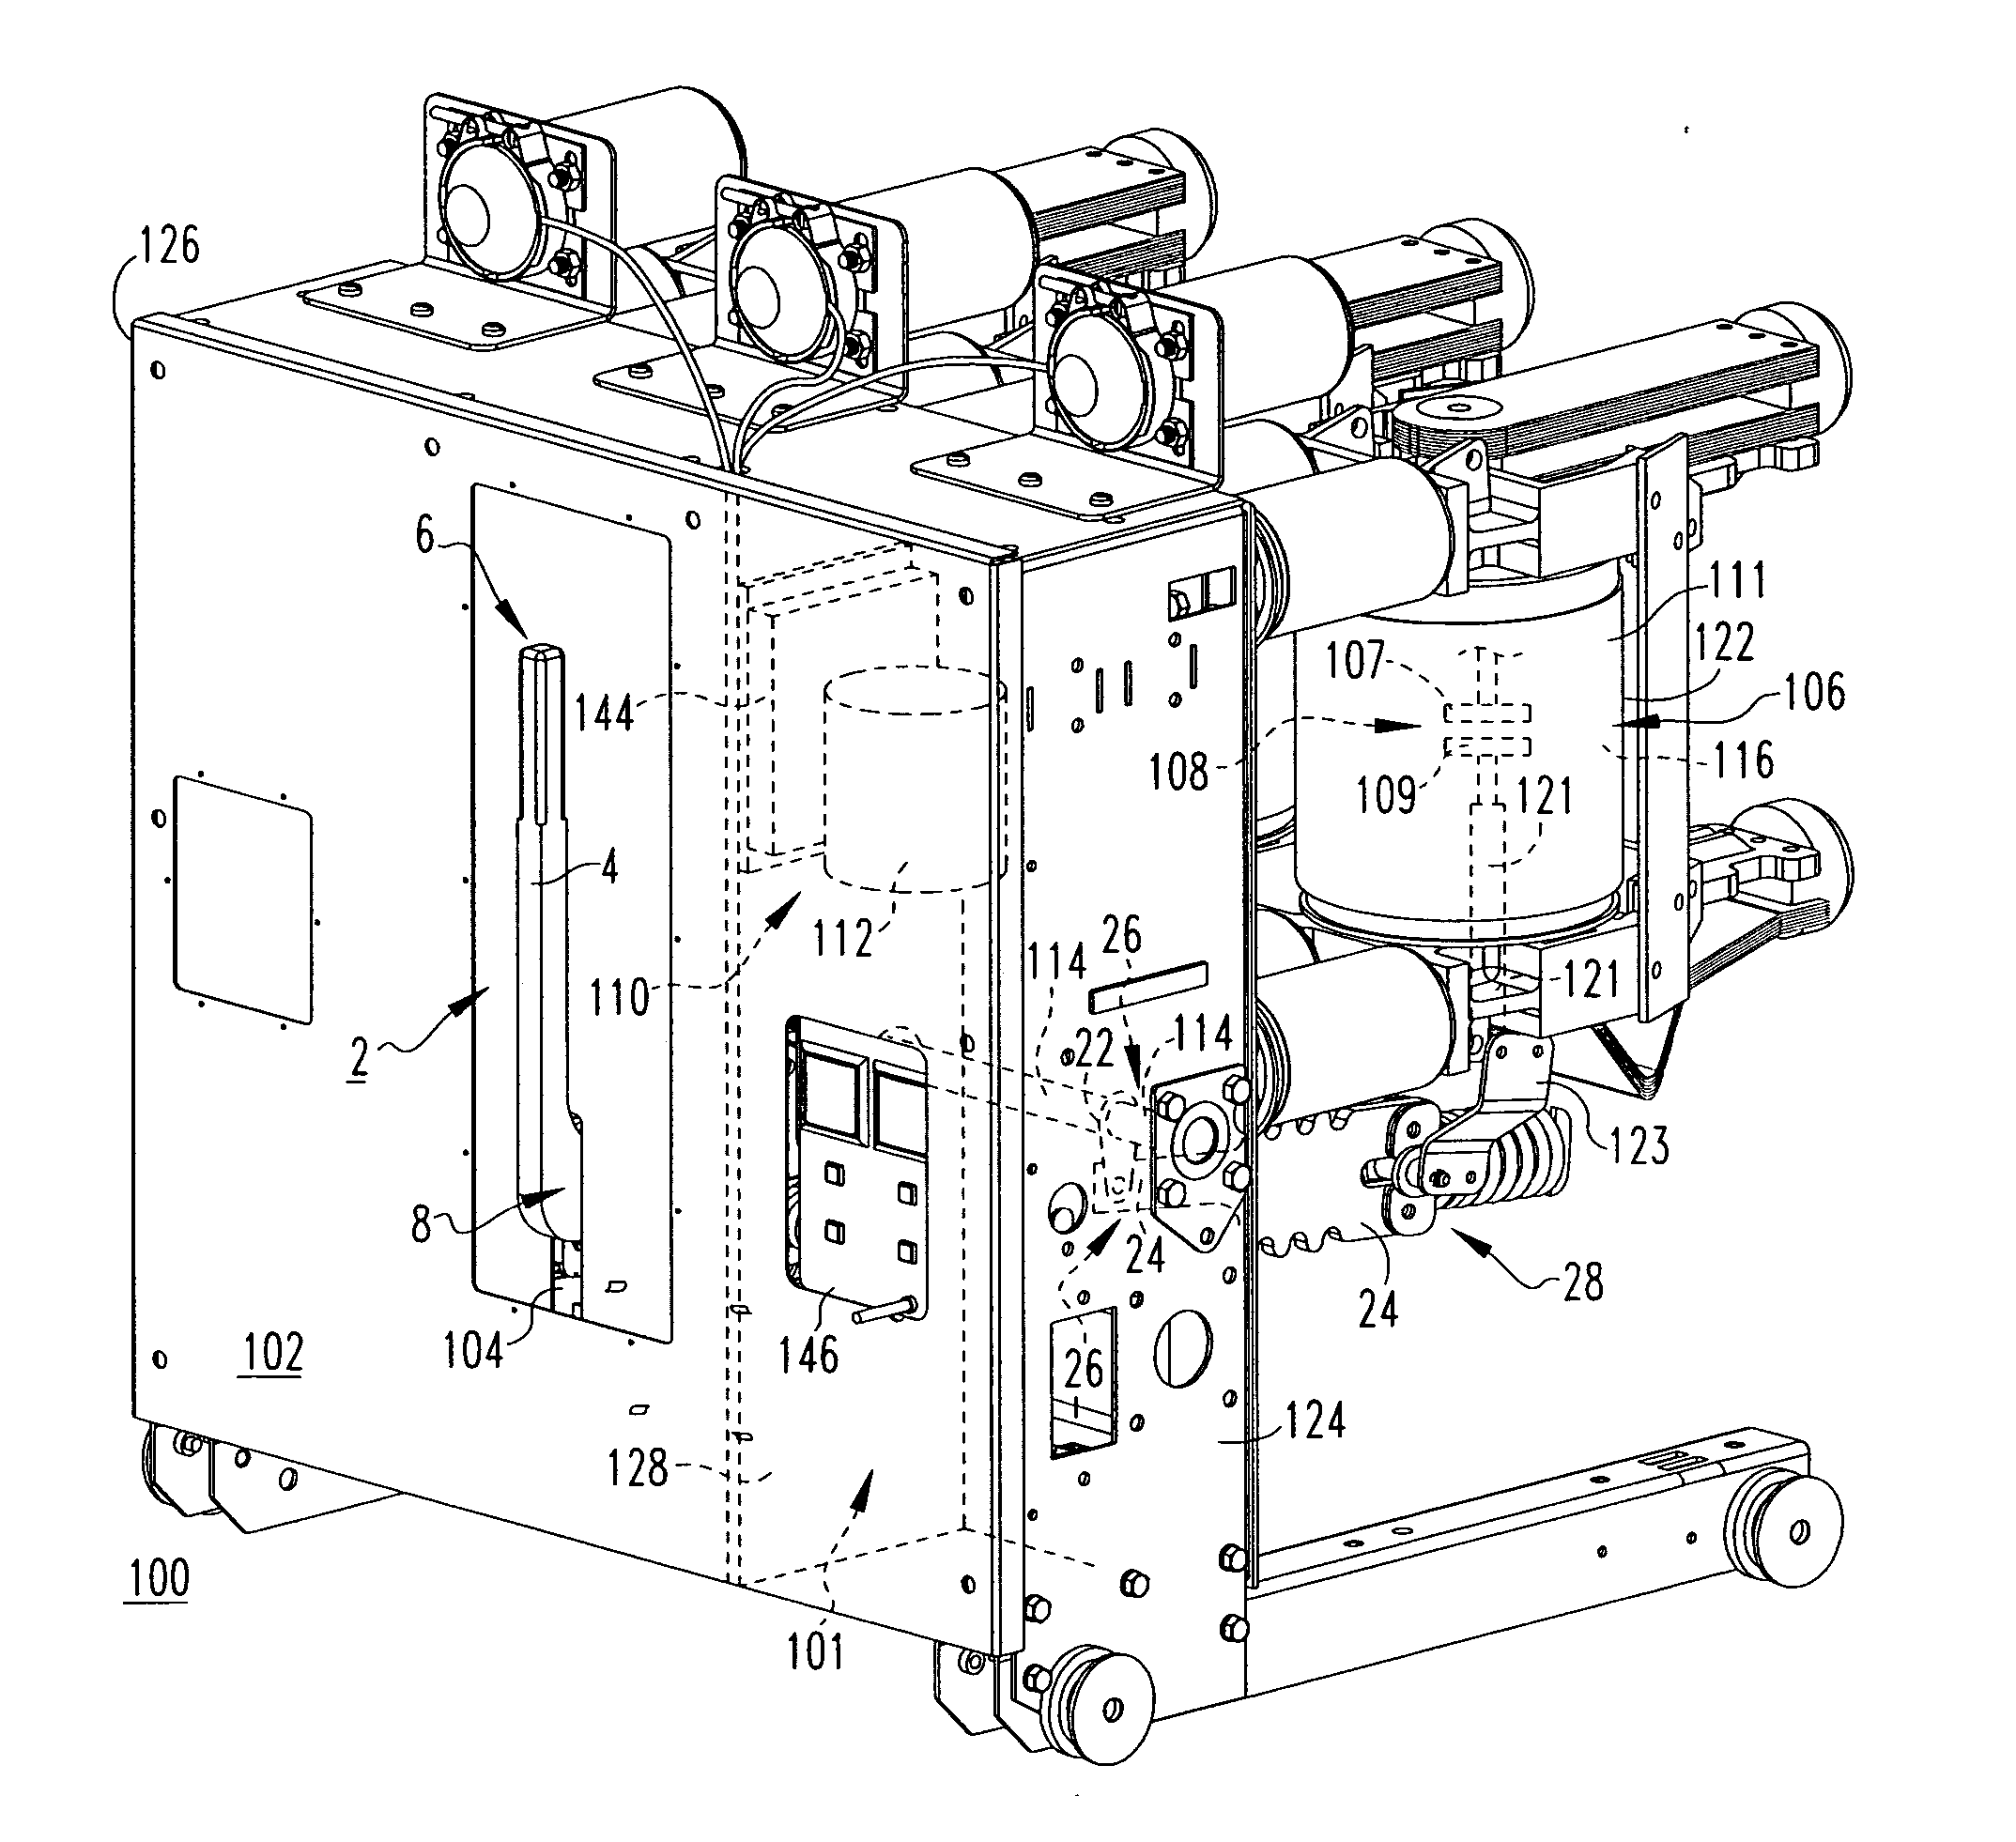 Manual opening device and electrical switching apparatus employing the same